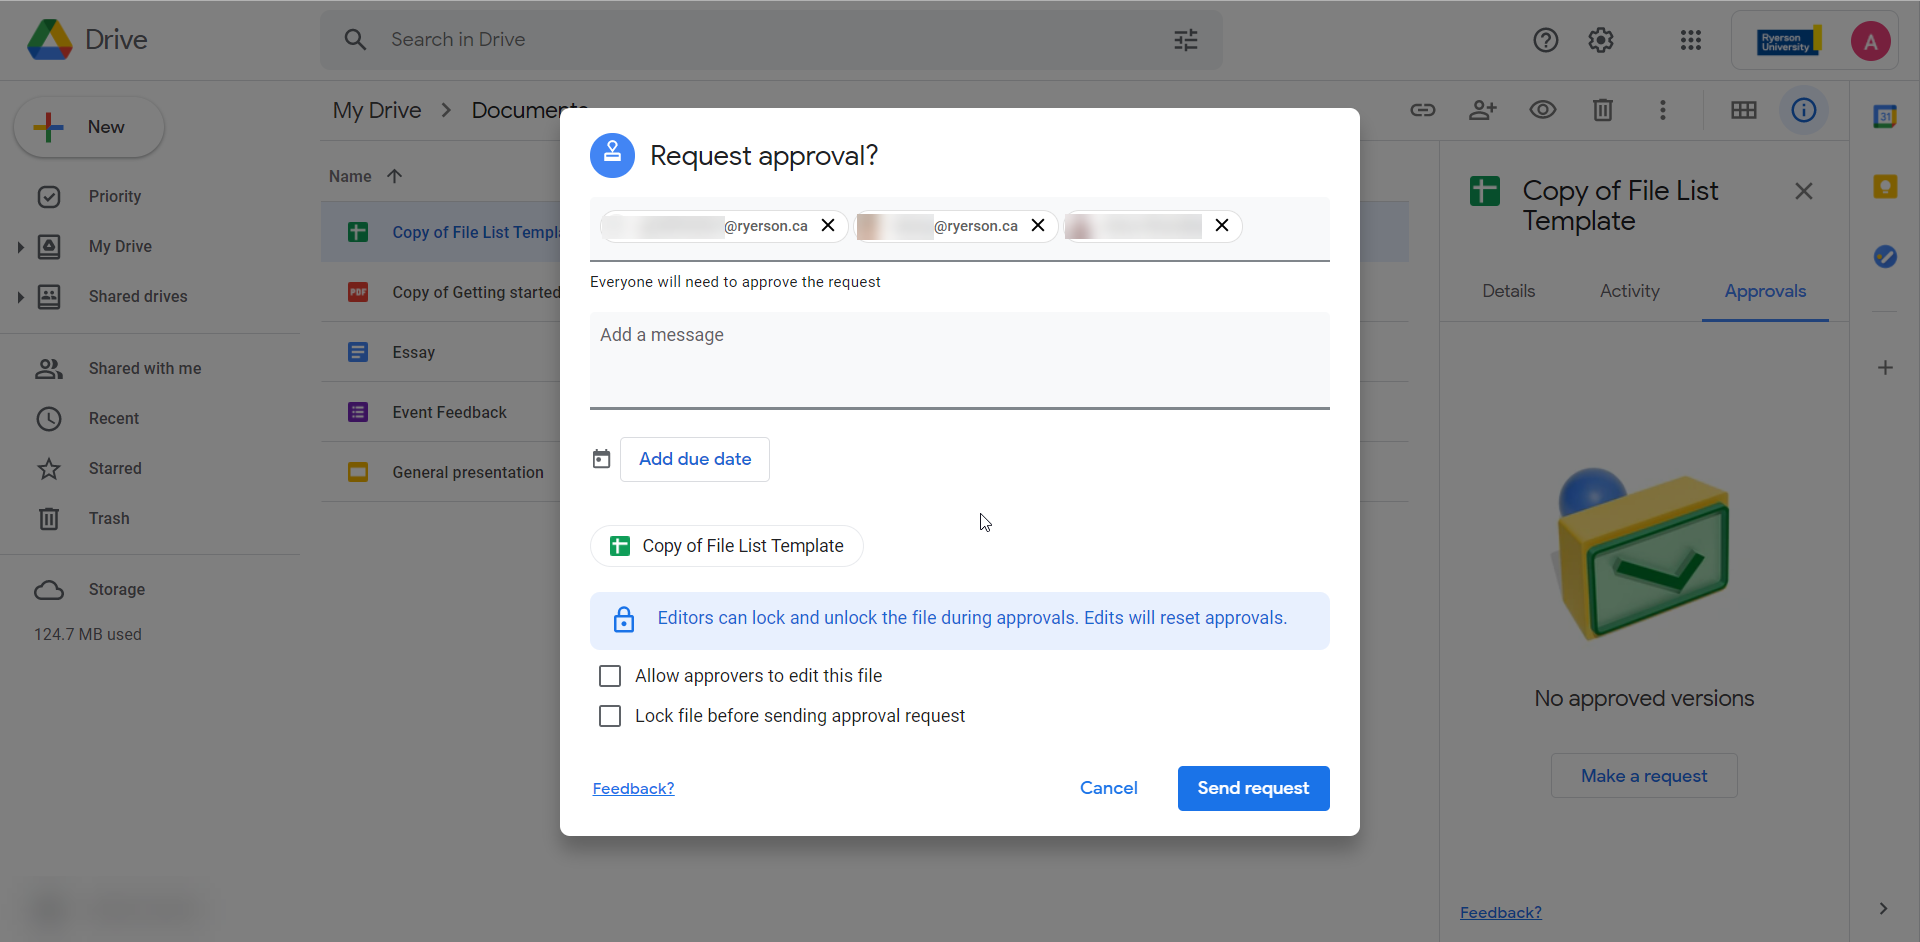 Pop up window of approval request details